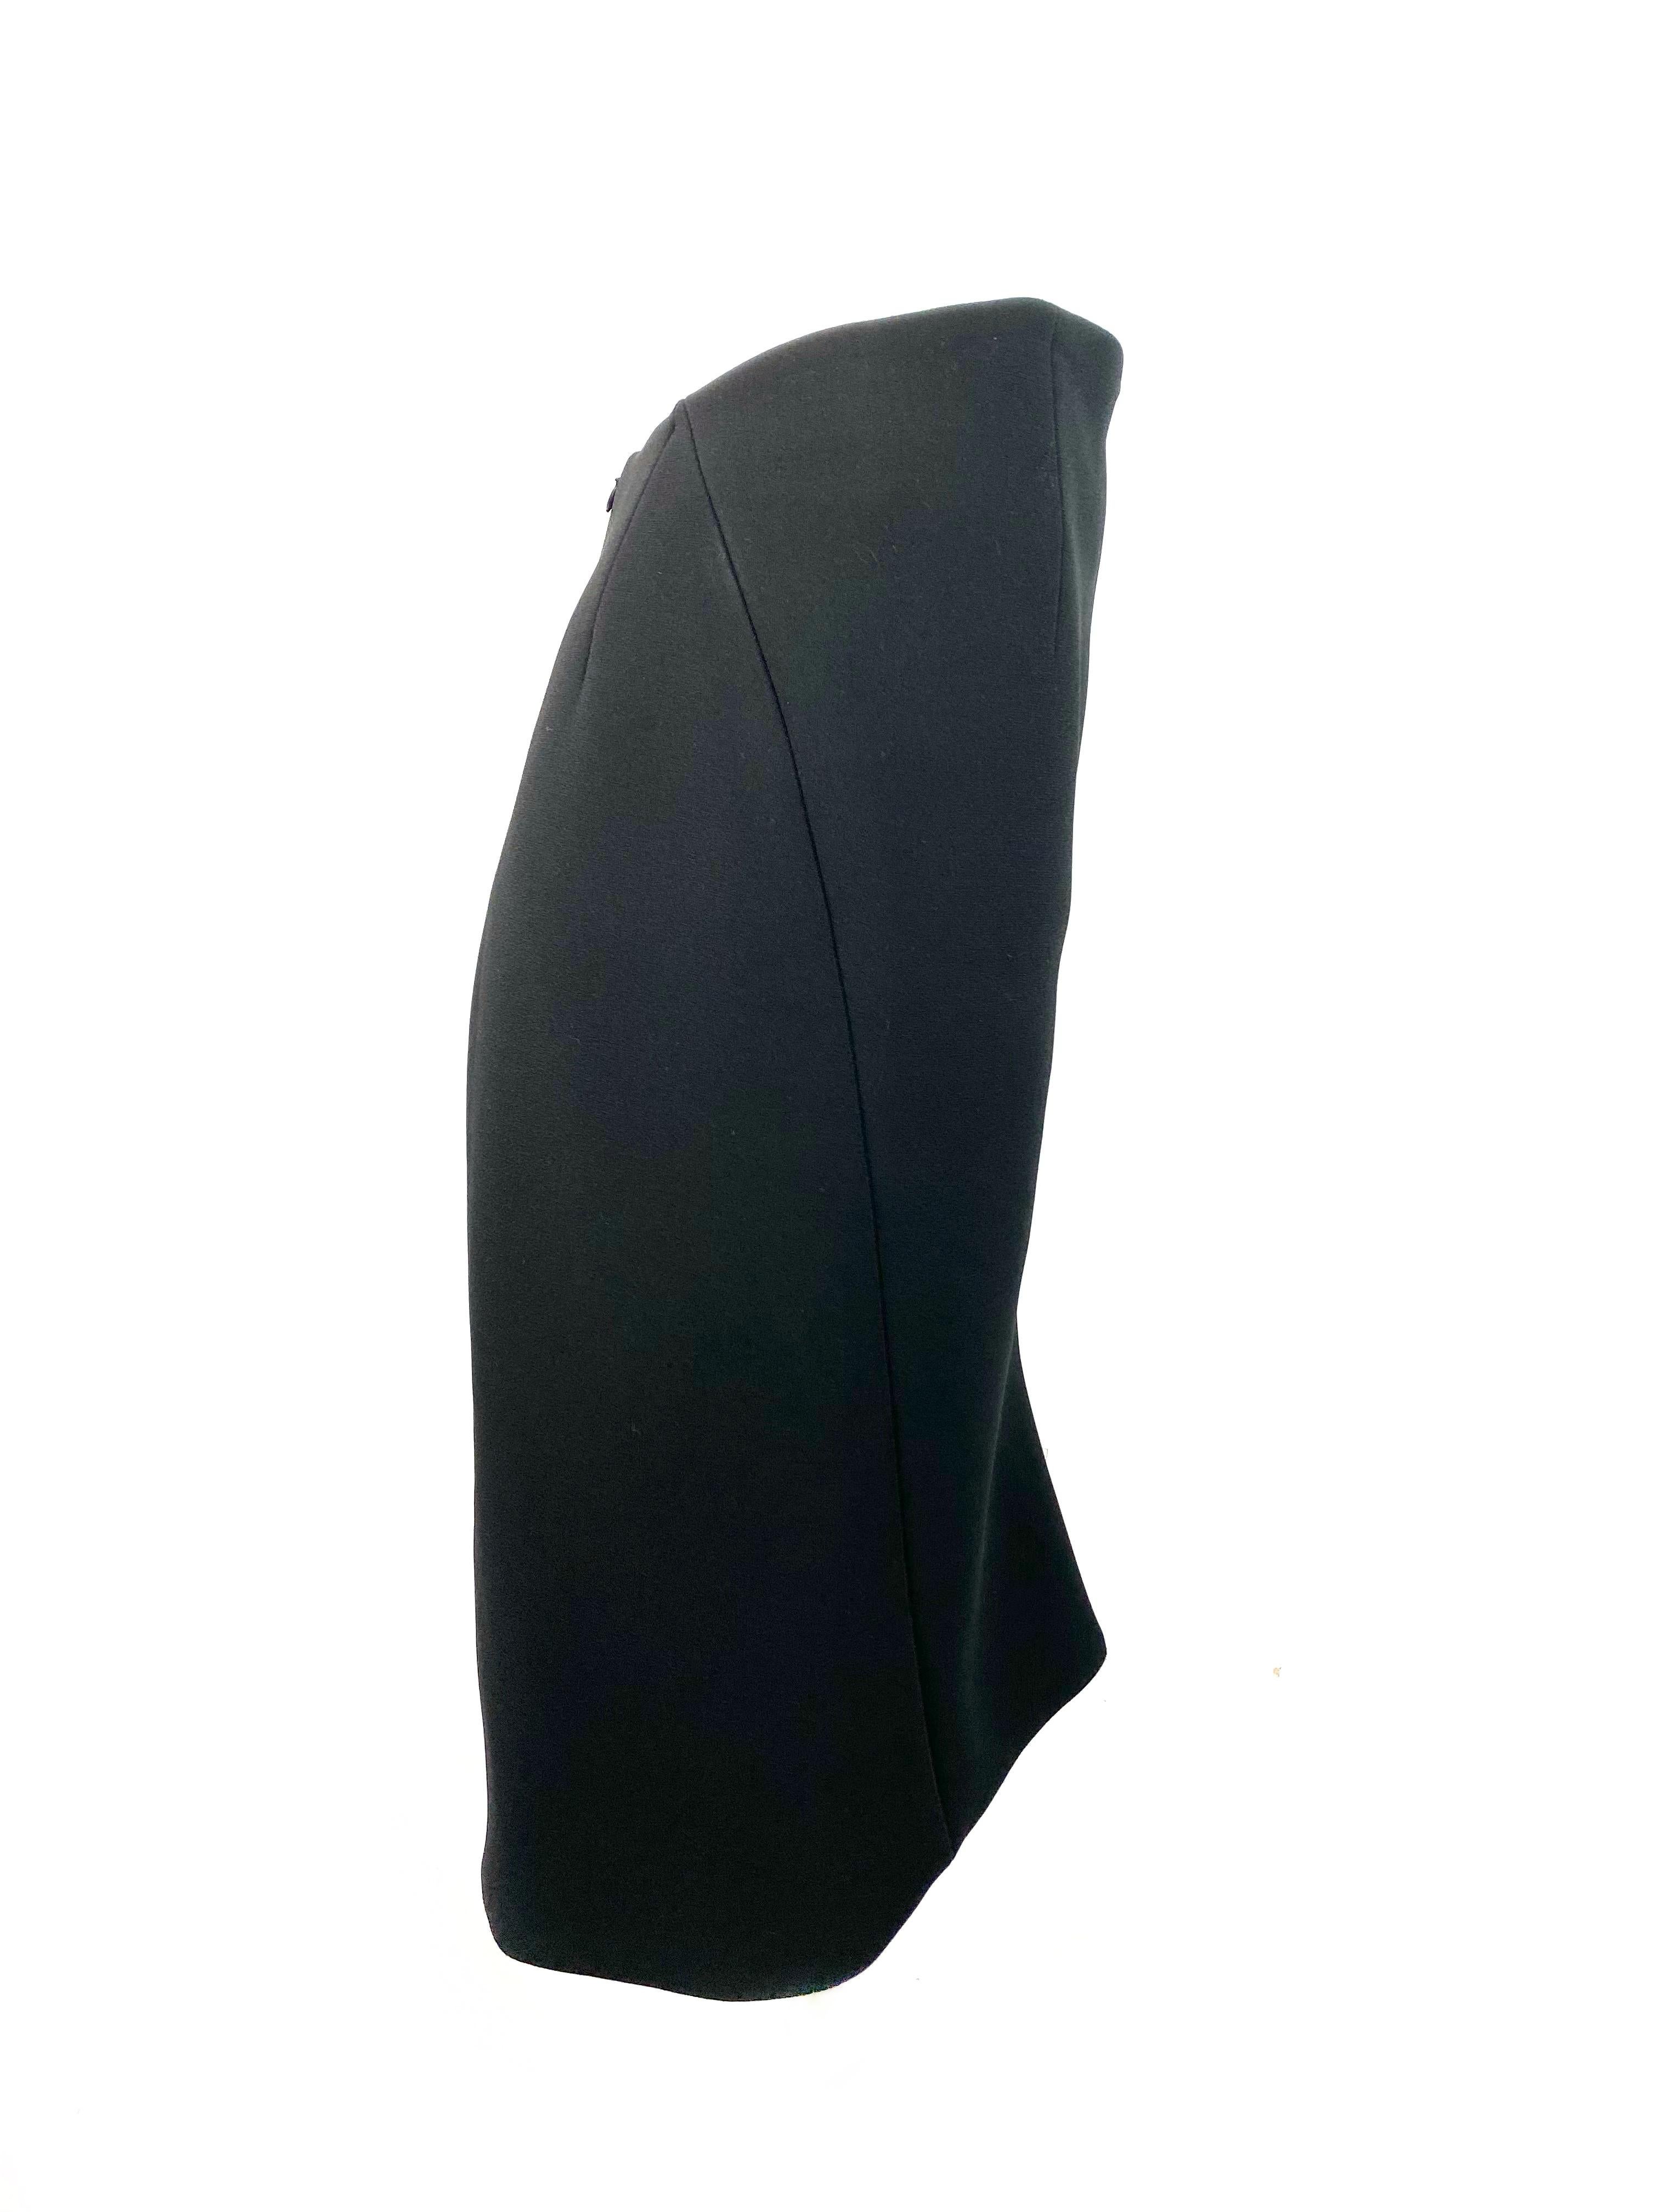 Product details:
Classic pencil skirt designed by Balenciaga, featuring asymmetrical cut, higher waisted and shorter on the front and lower waisted and longer on the back. Total front length is 23